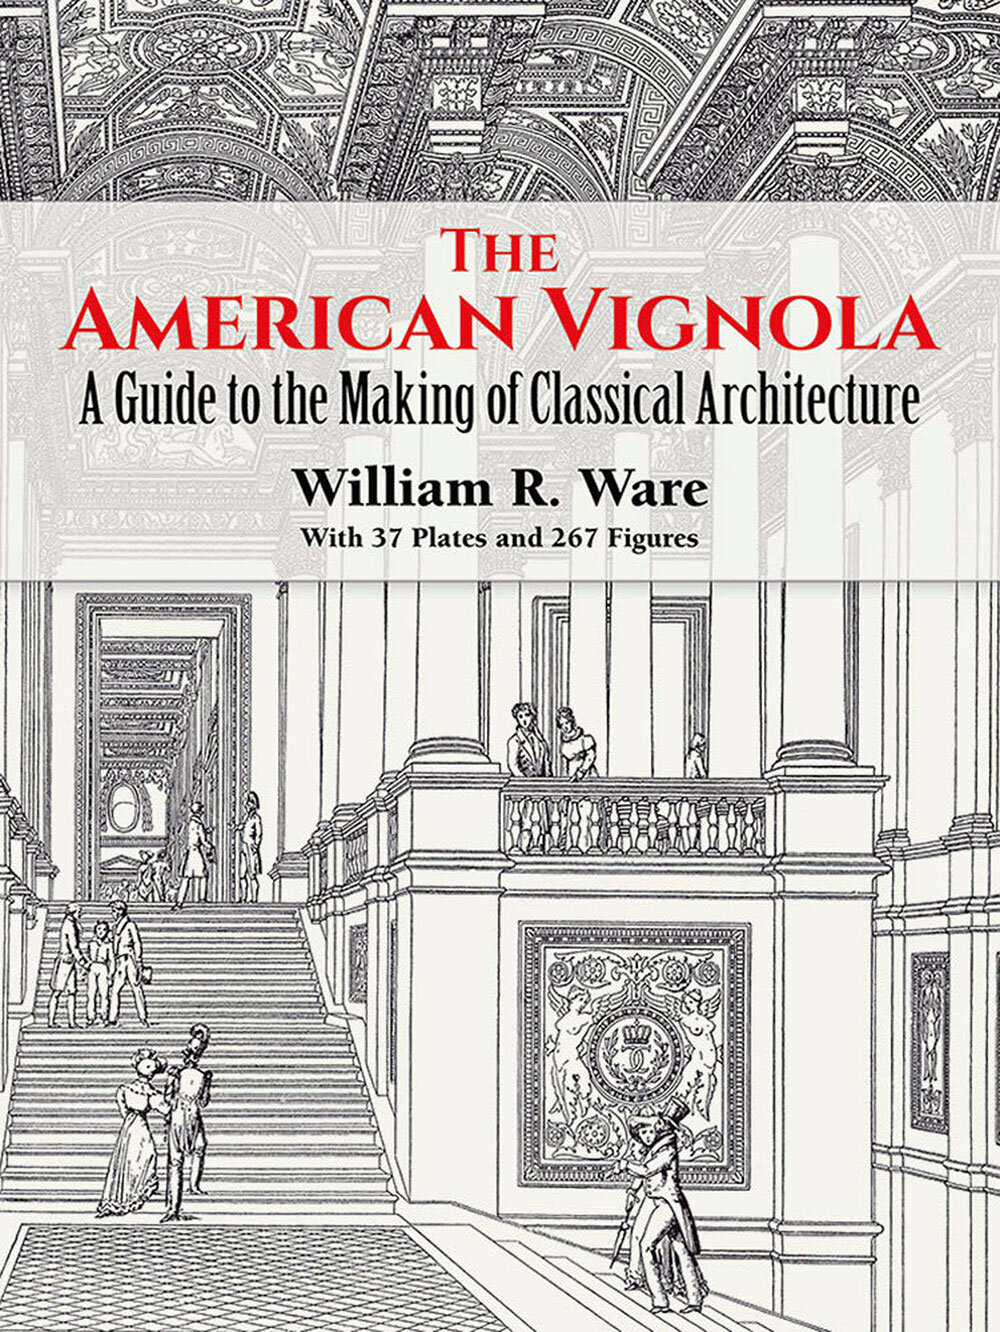 Charles-Hilton-Architects---The-American-Vignola-A-Guide-to-the-Making-of-Classical-Architecture.jpg